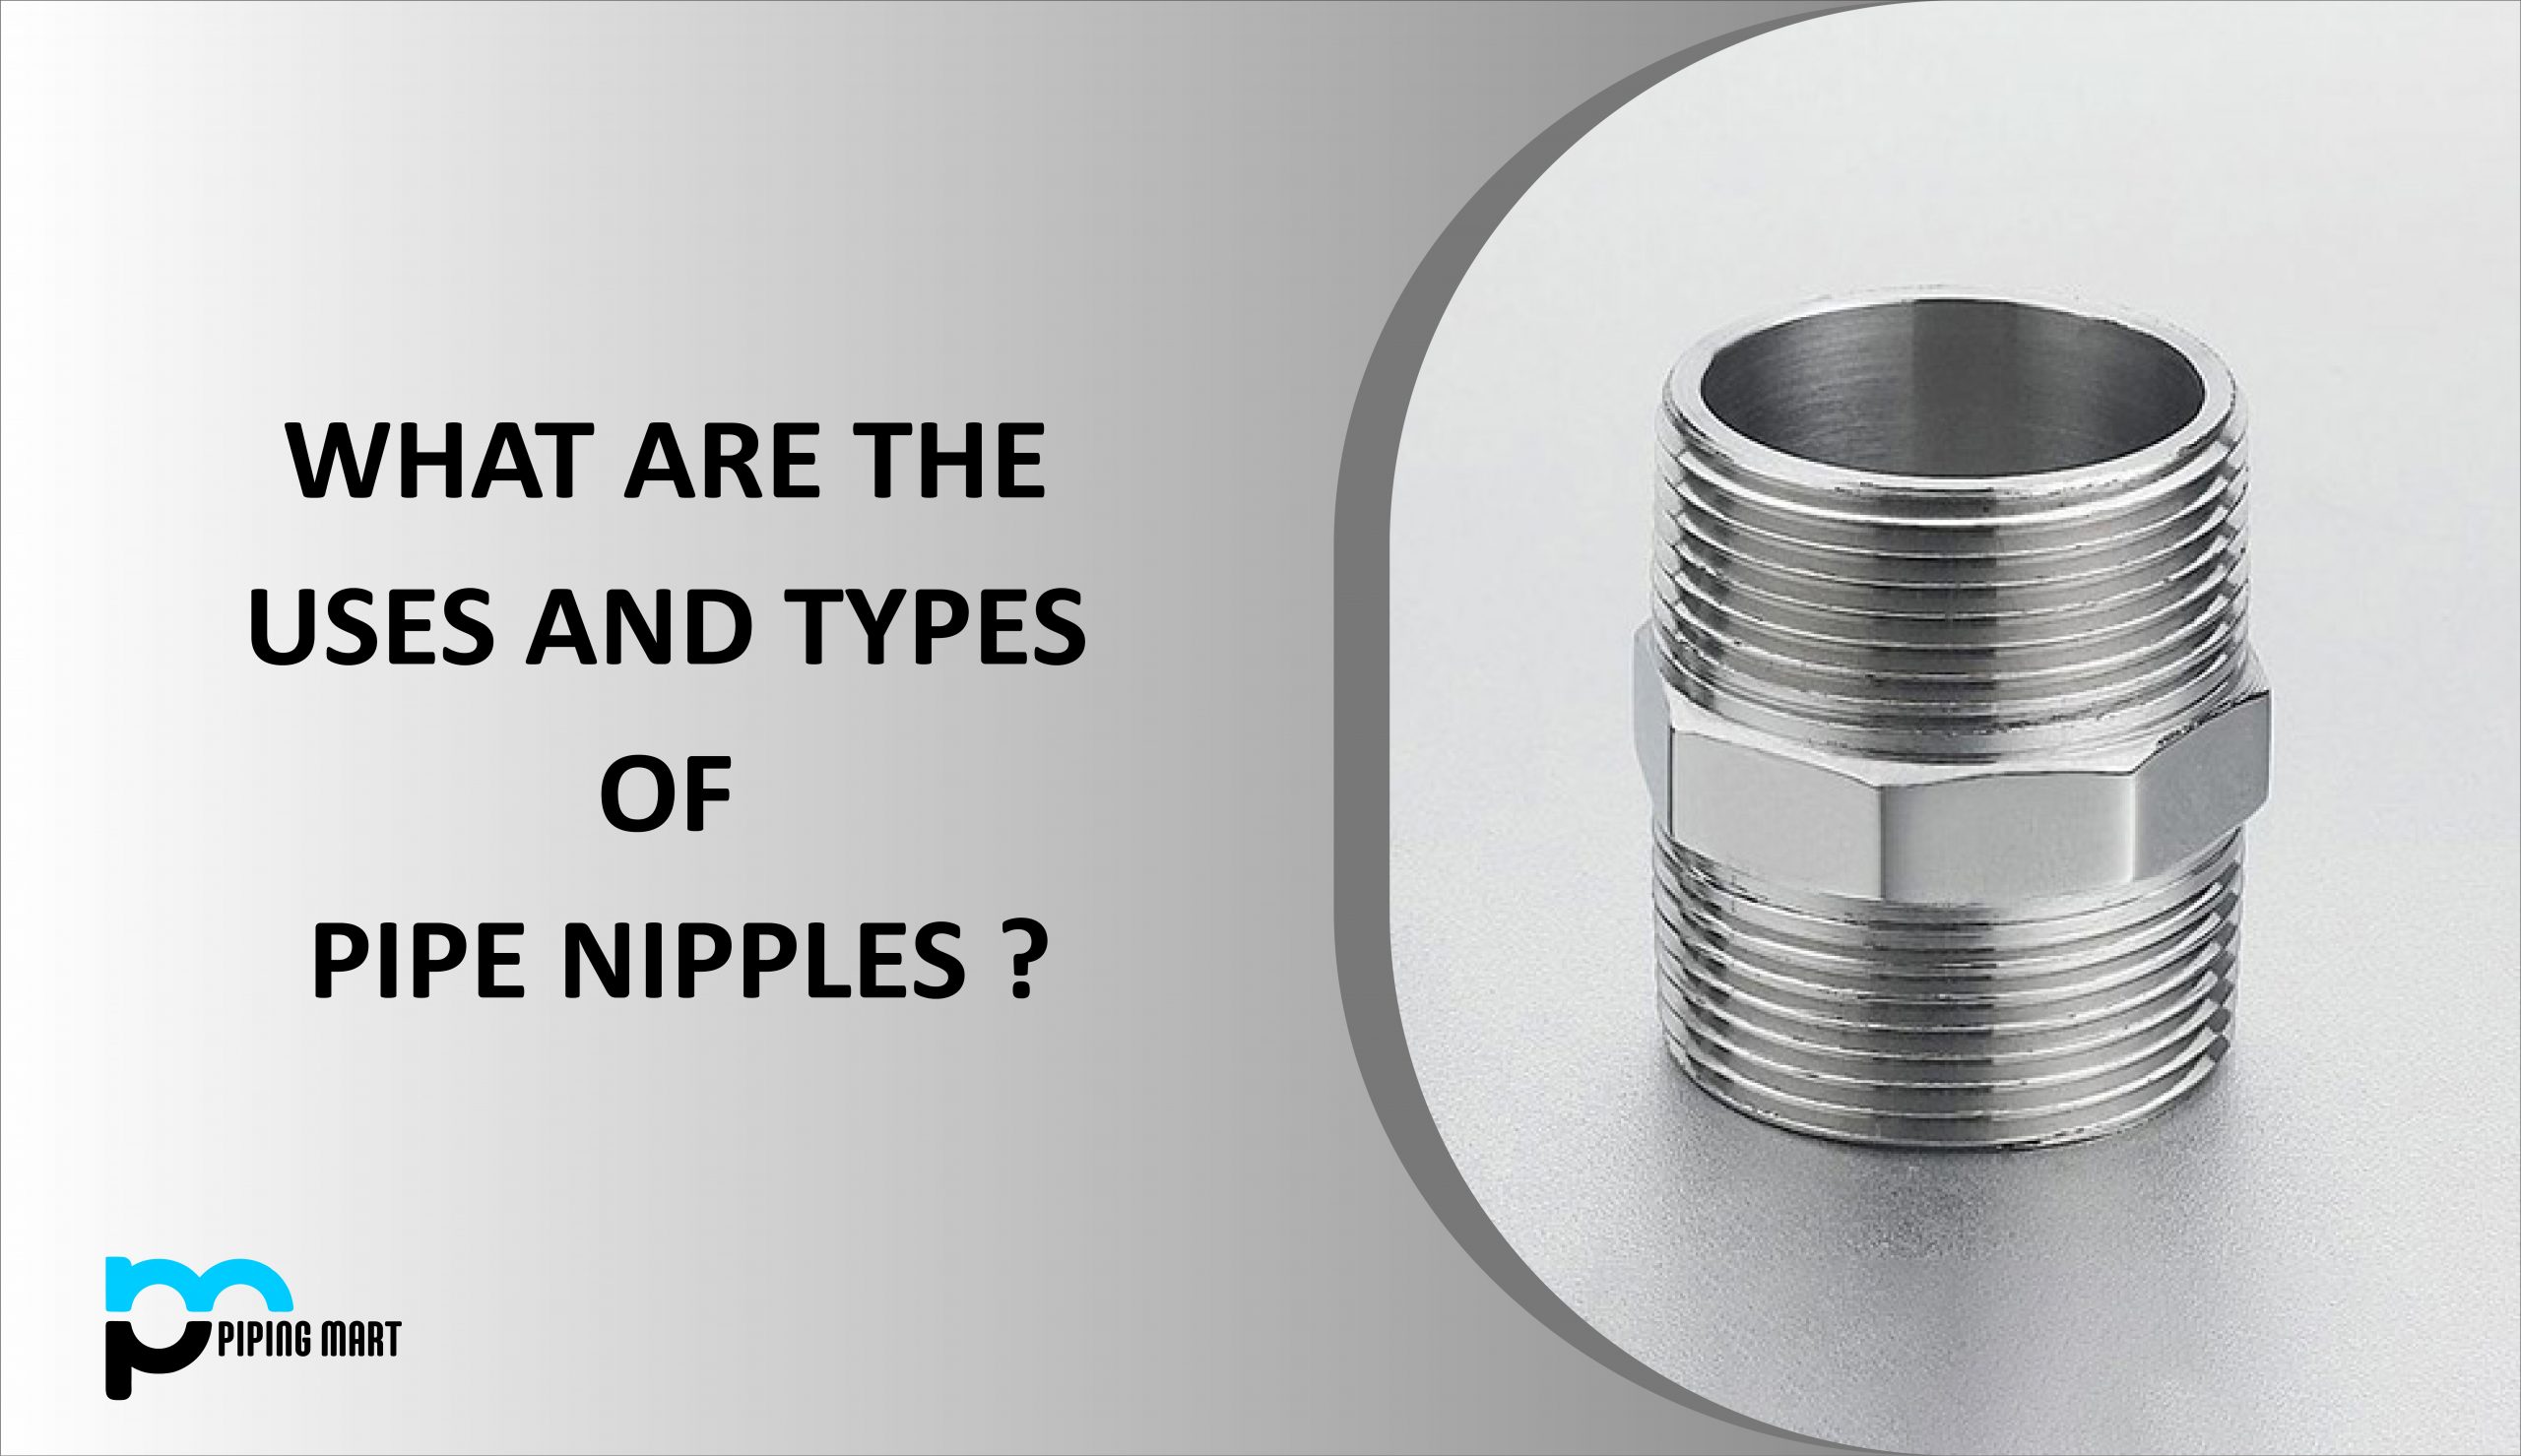 https://cdn.thepipingmart.com/wp-content/uploads/2022/07/What-are-the-uses-and-types-of-pipe-nipples-scaled.jpg